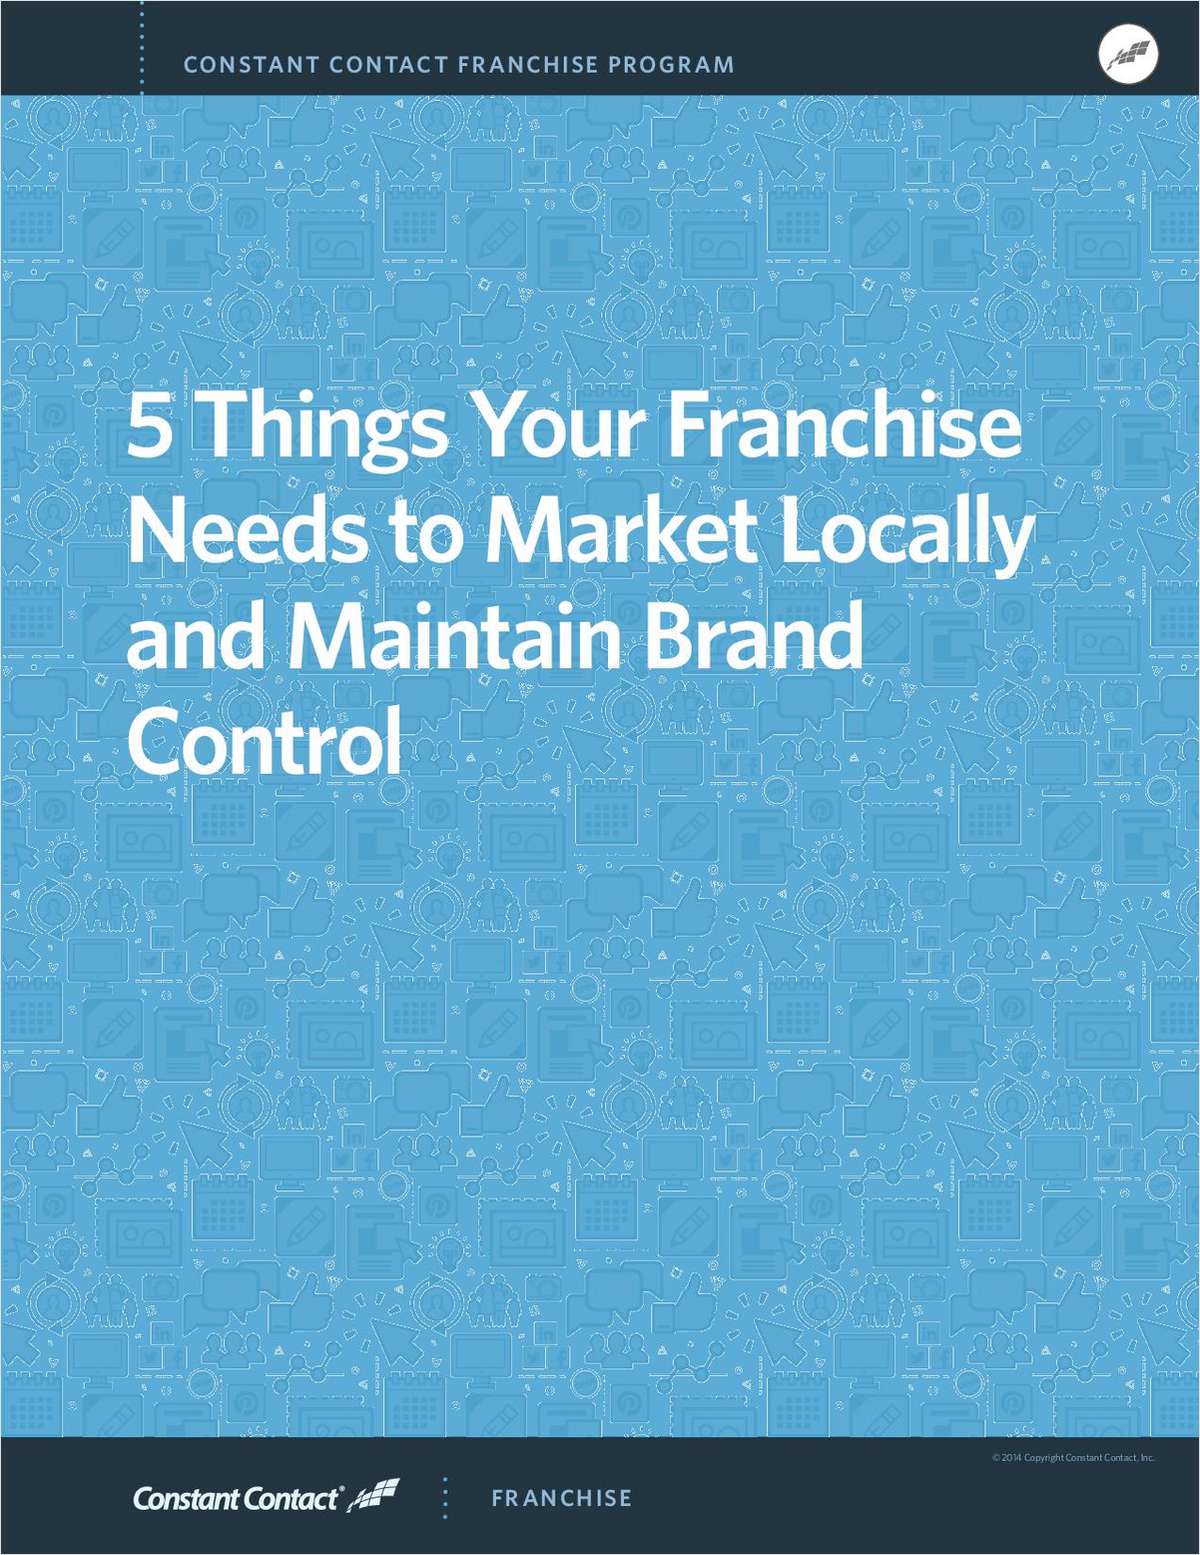 5 Things Your Franchise Needs to Market Locally and Maintain Brand Control